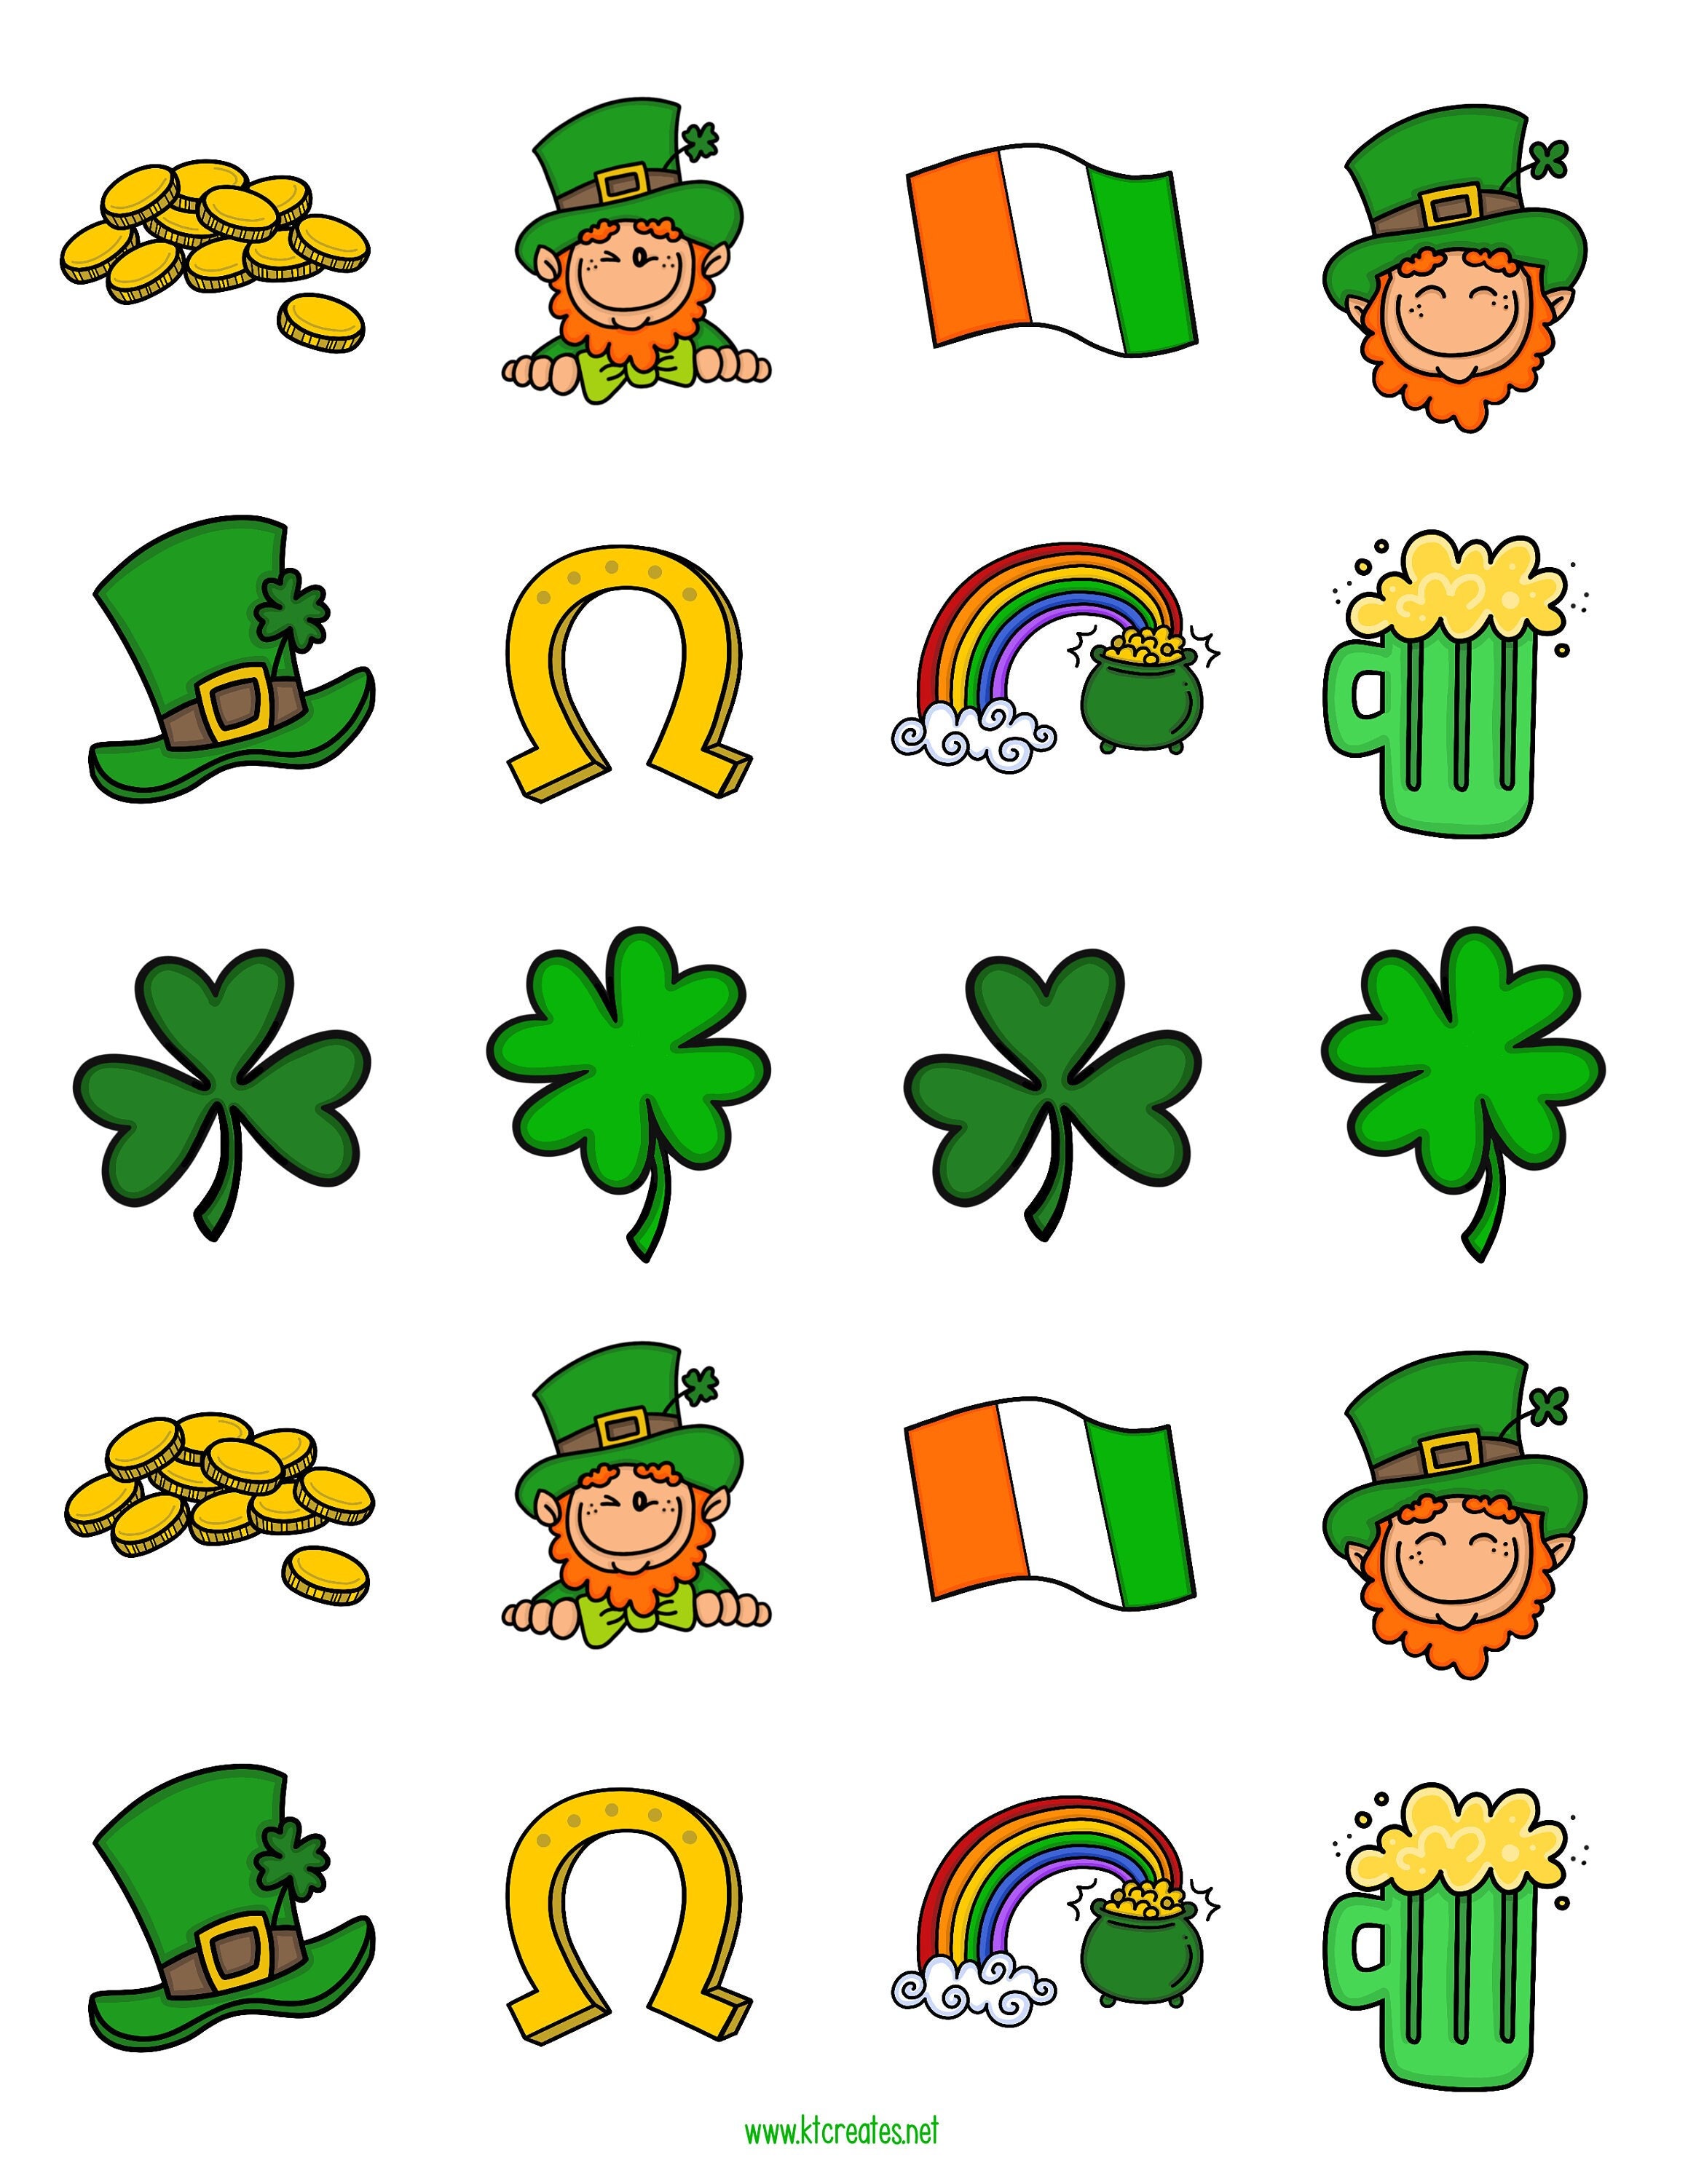 Assorted St Patricks Day Envelope Seals 1.2 Fun St Patrick's Day Stickers  144 Stickers 25176 